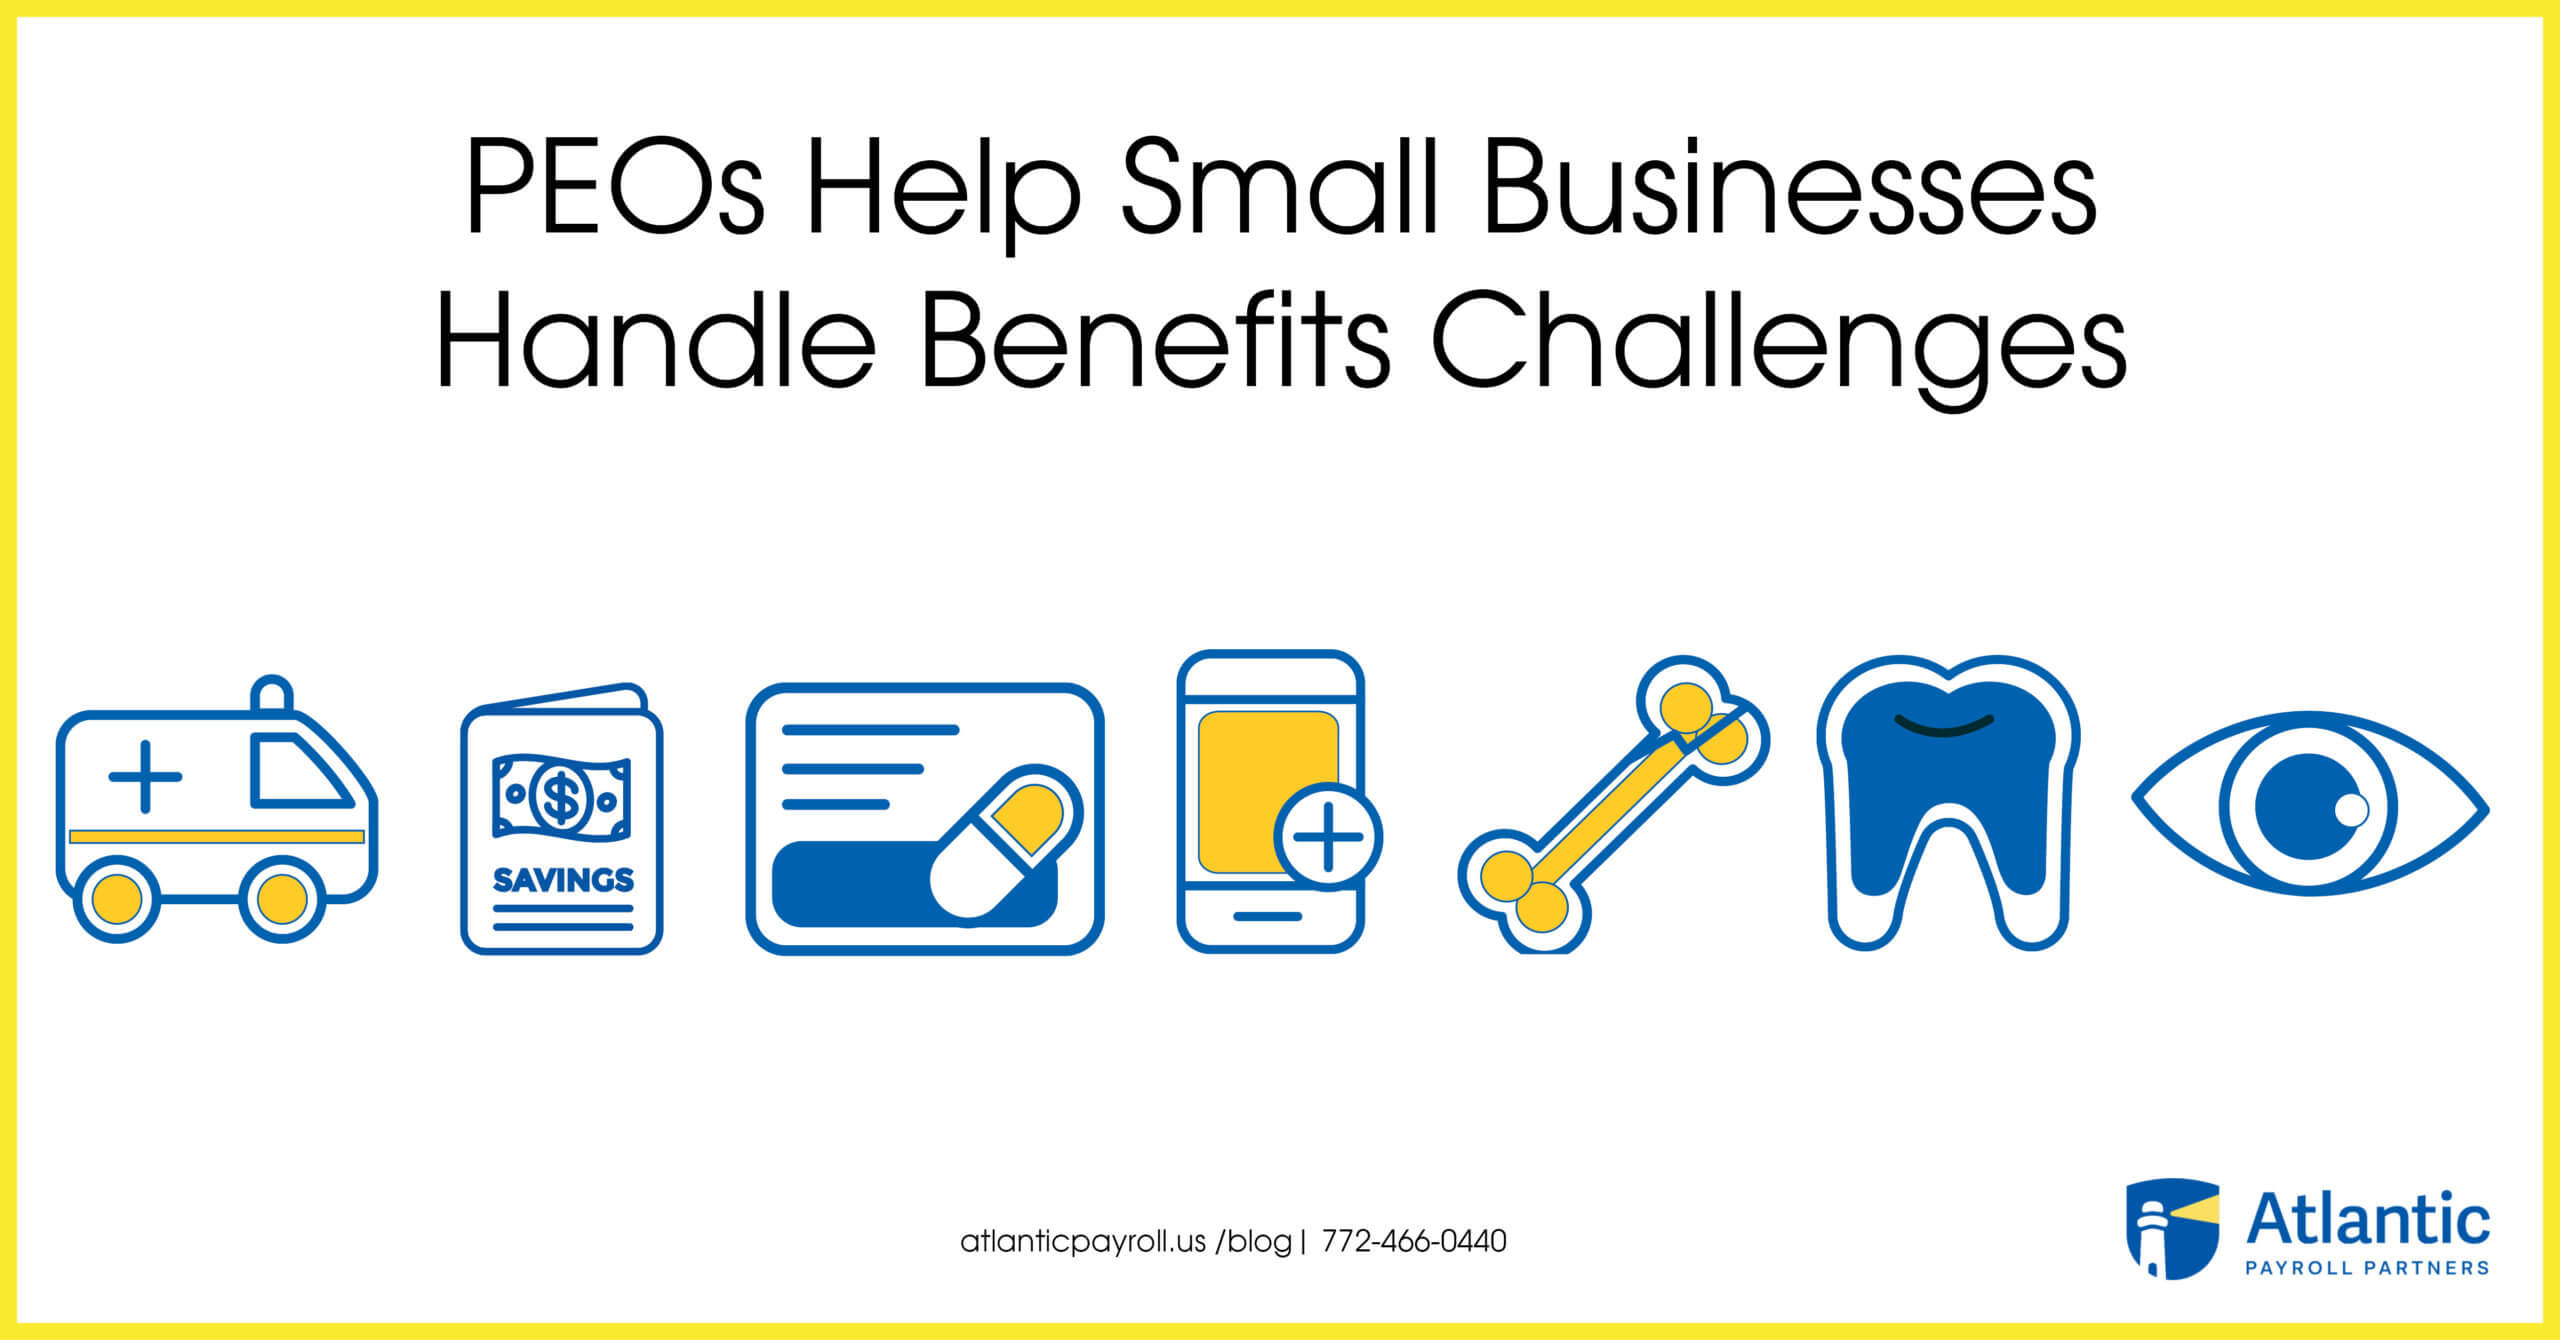 How PEOs Help Small Businesses Handle Benefits Challenges